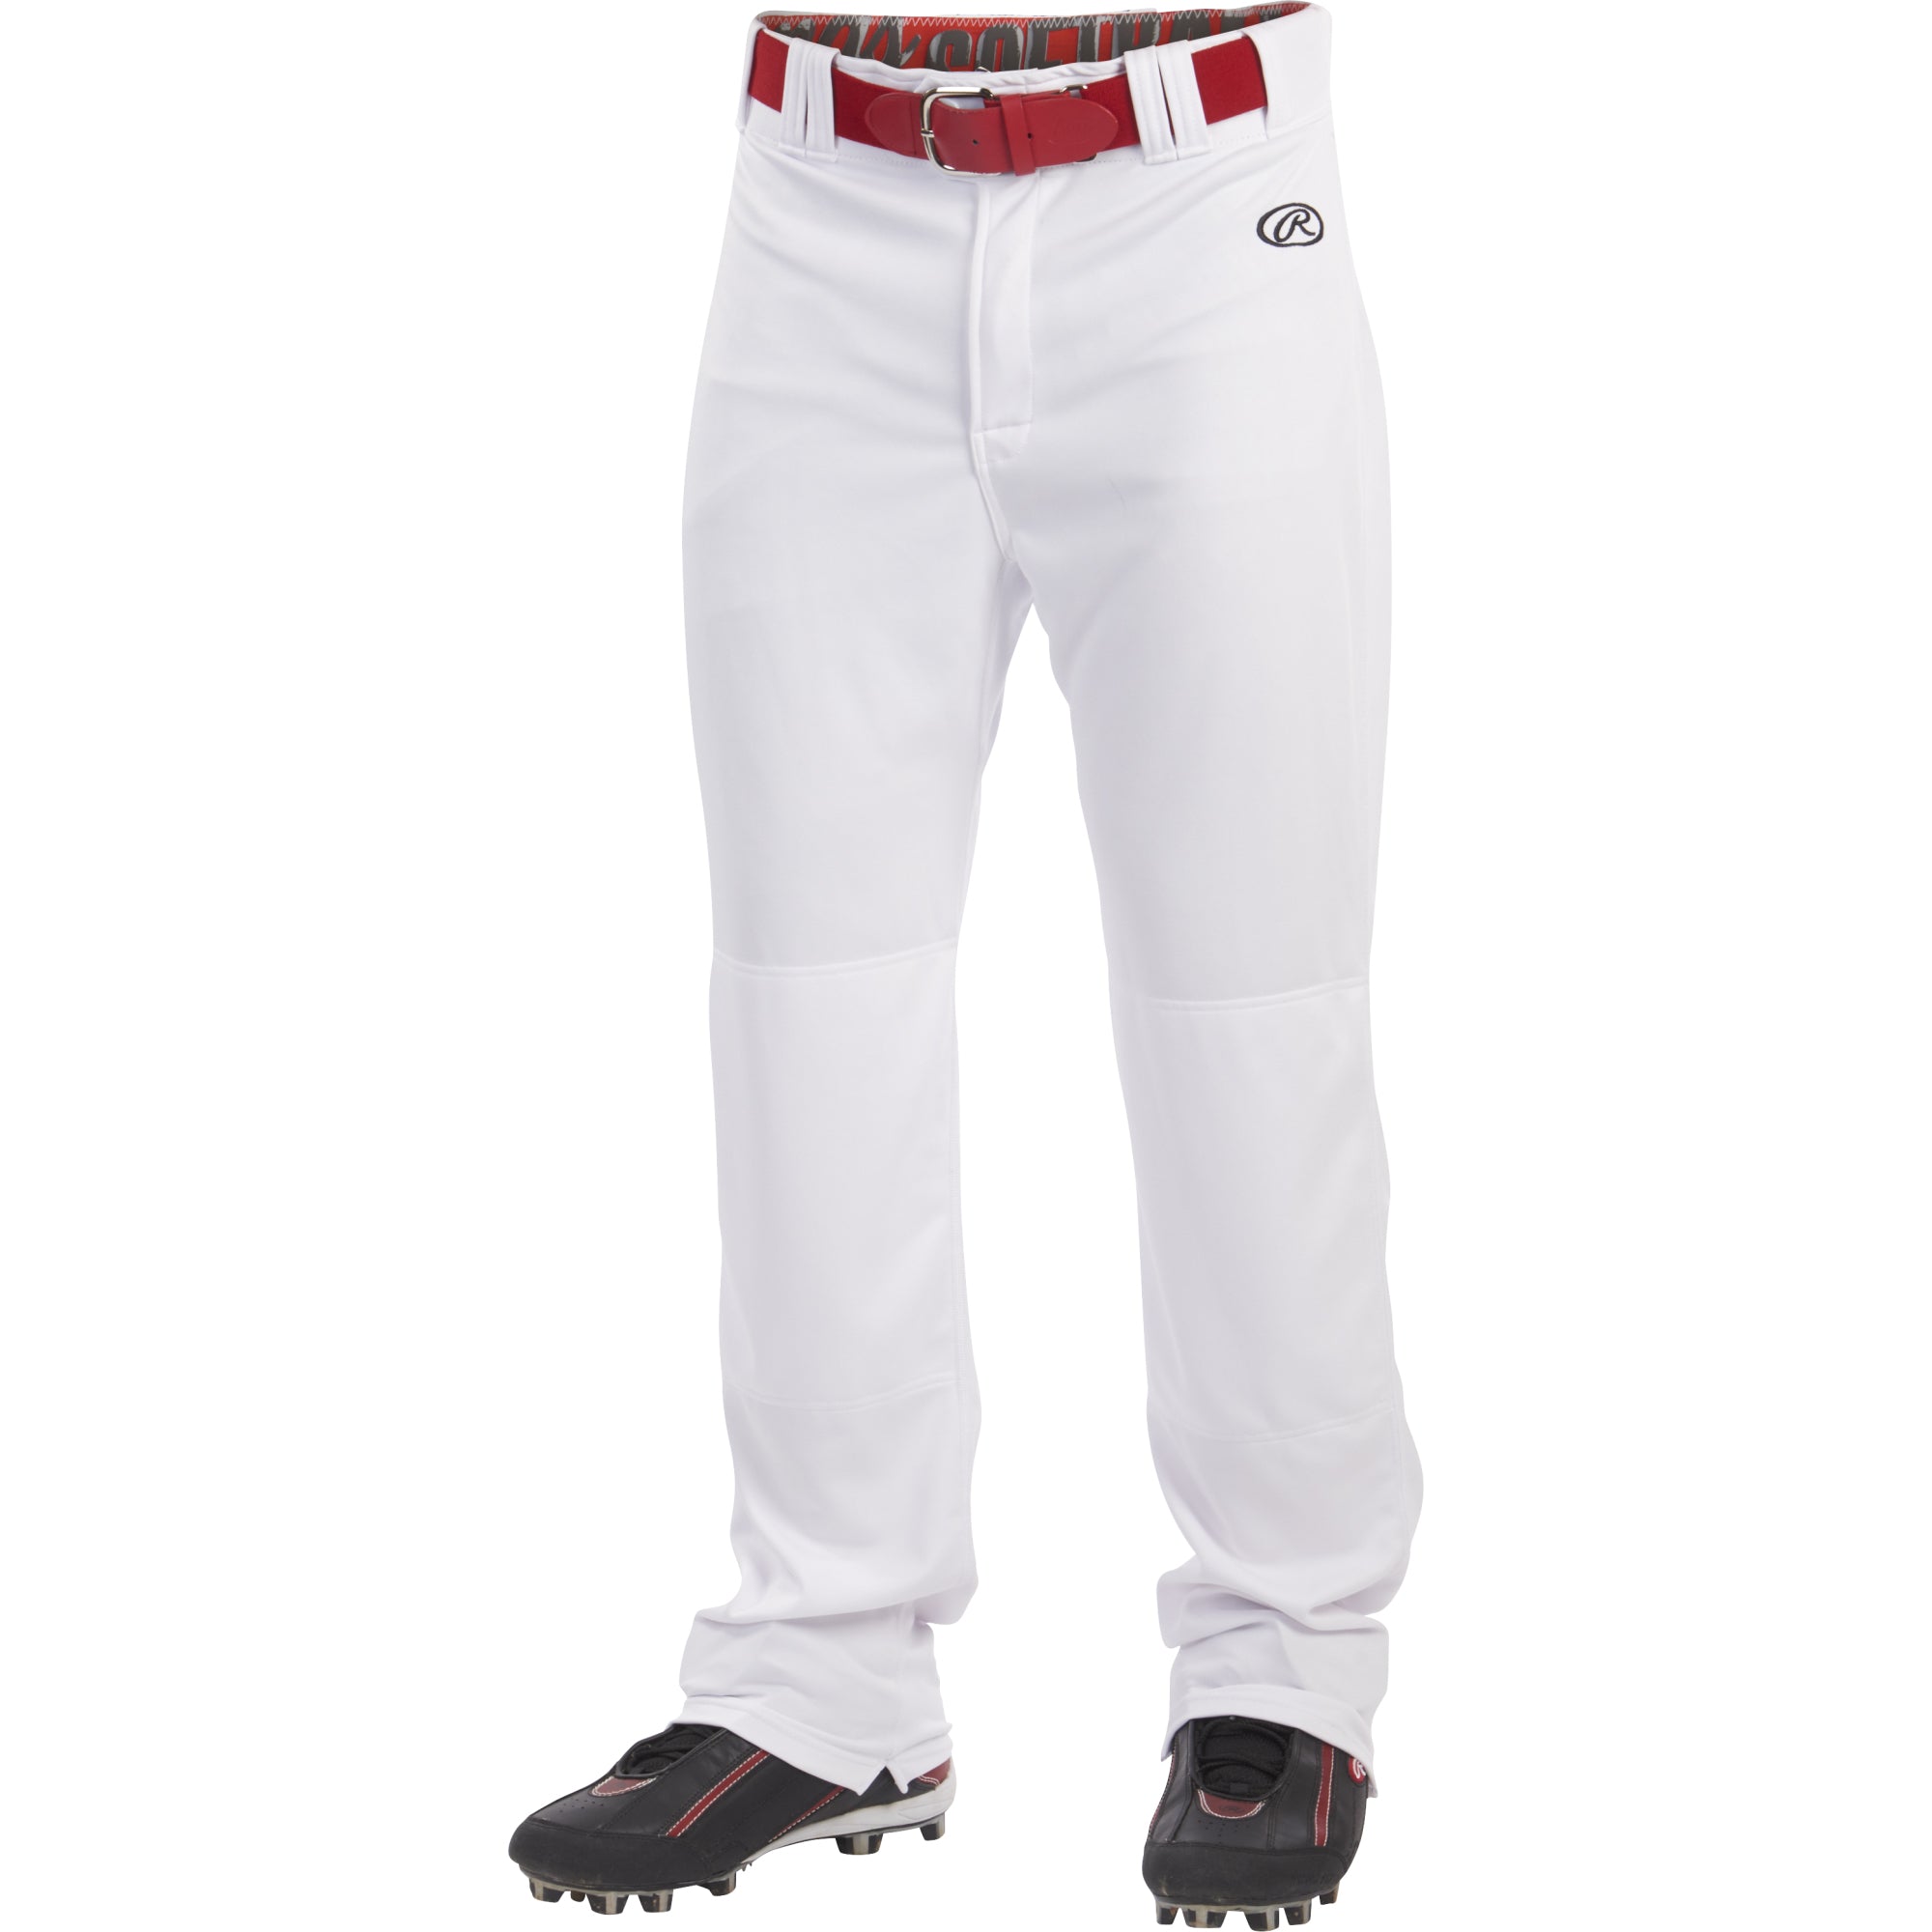 Rawlings Launch Pant Youth